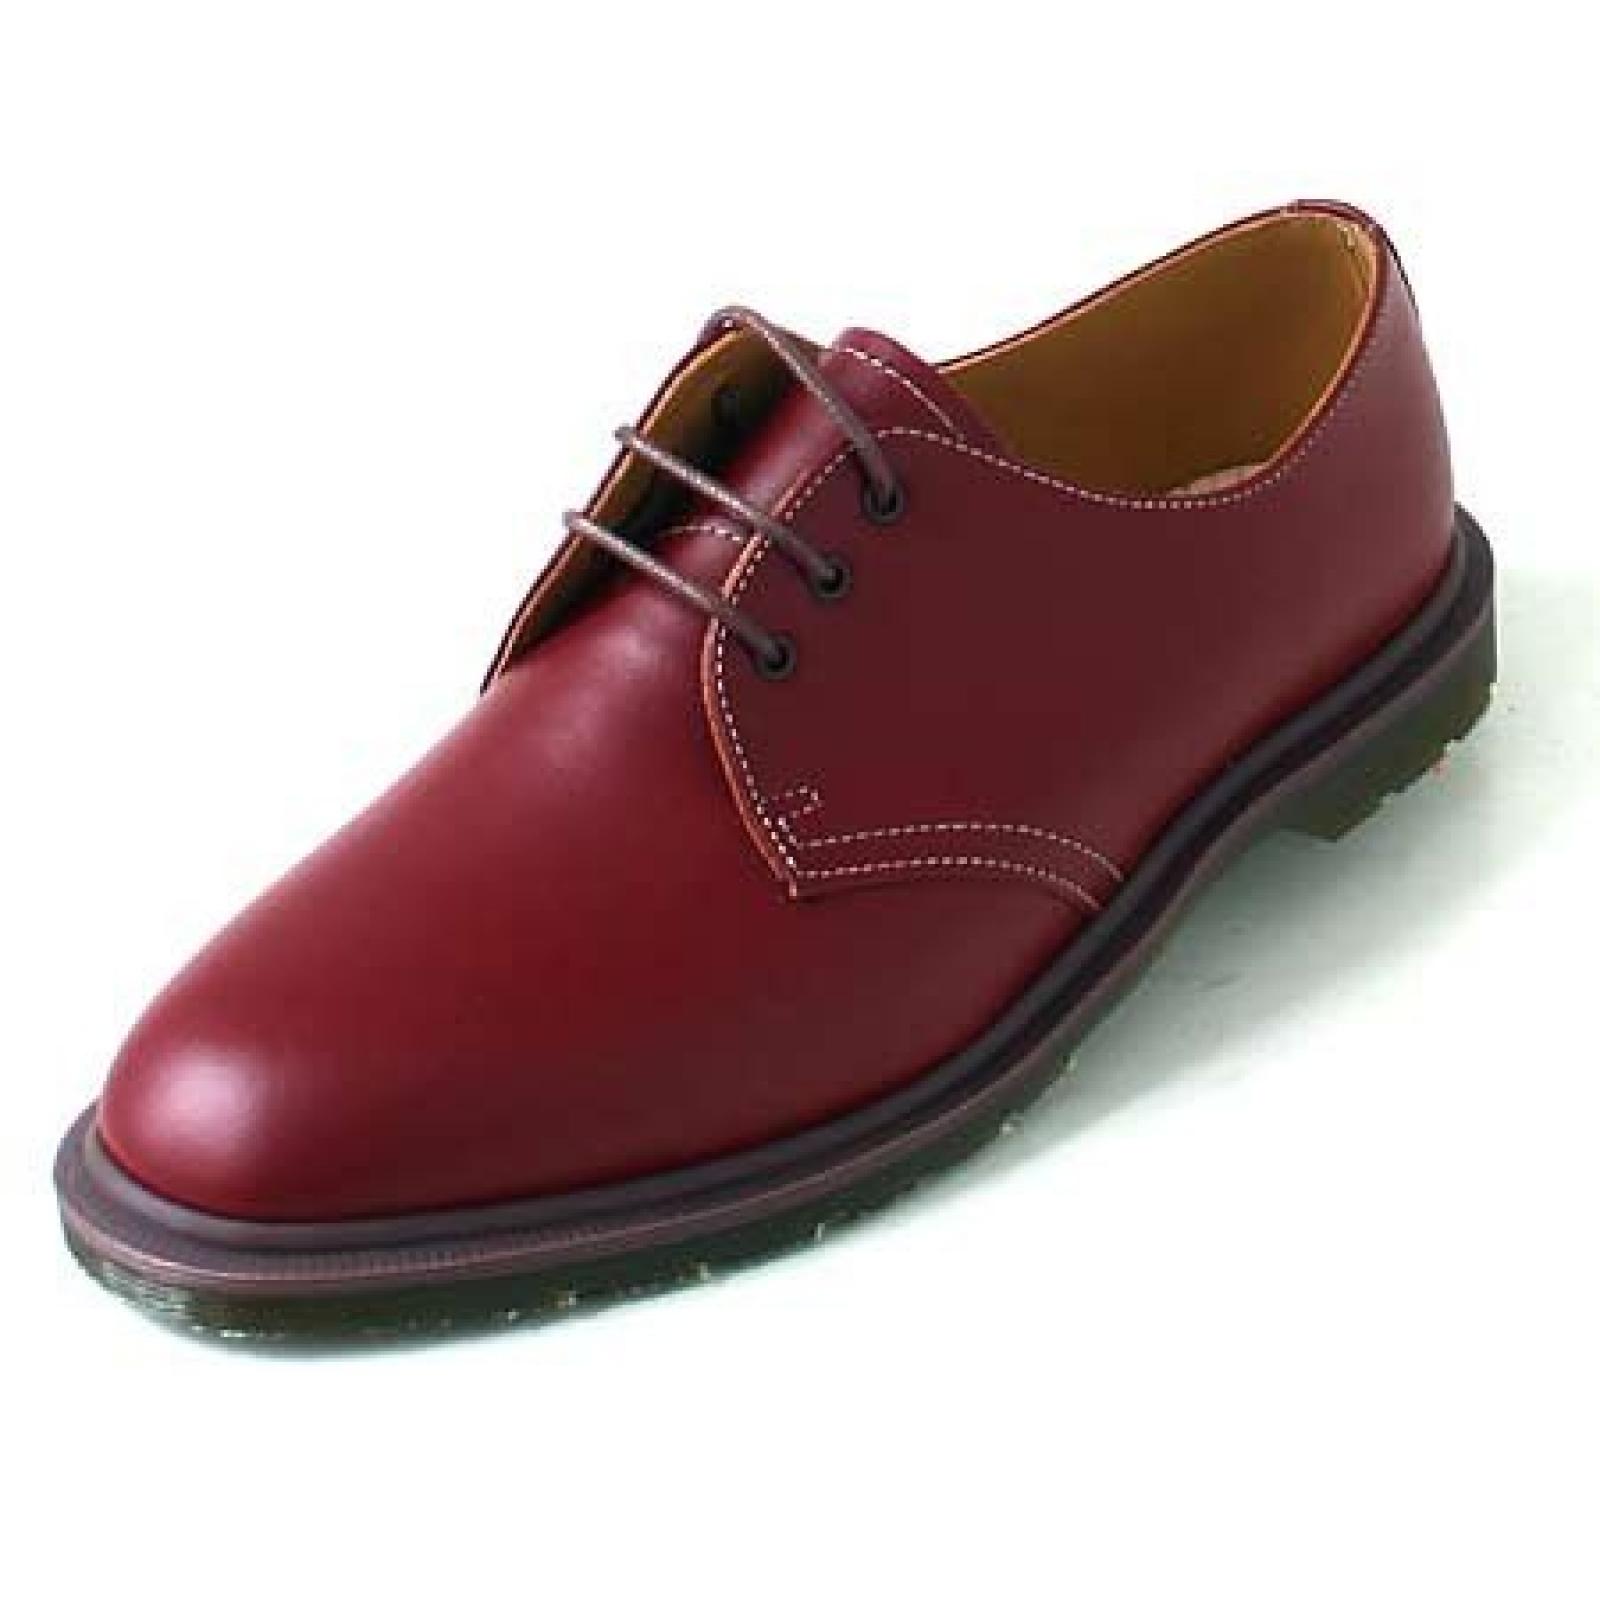 Dr. Martens Steed oxblood 